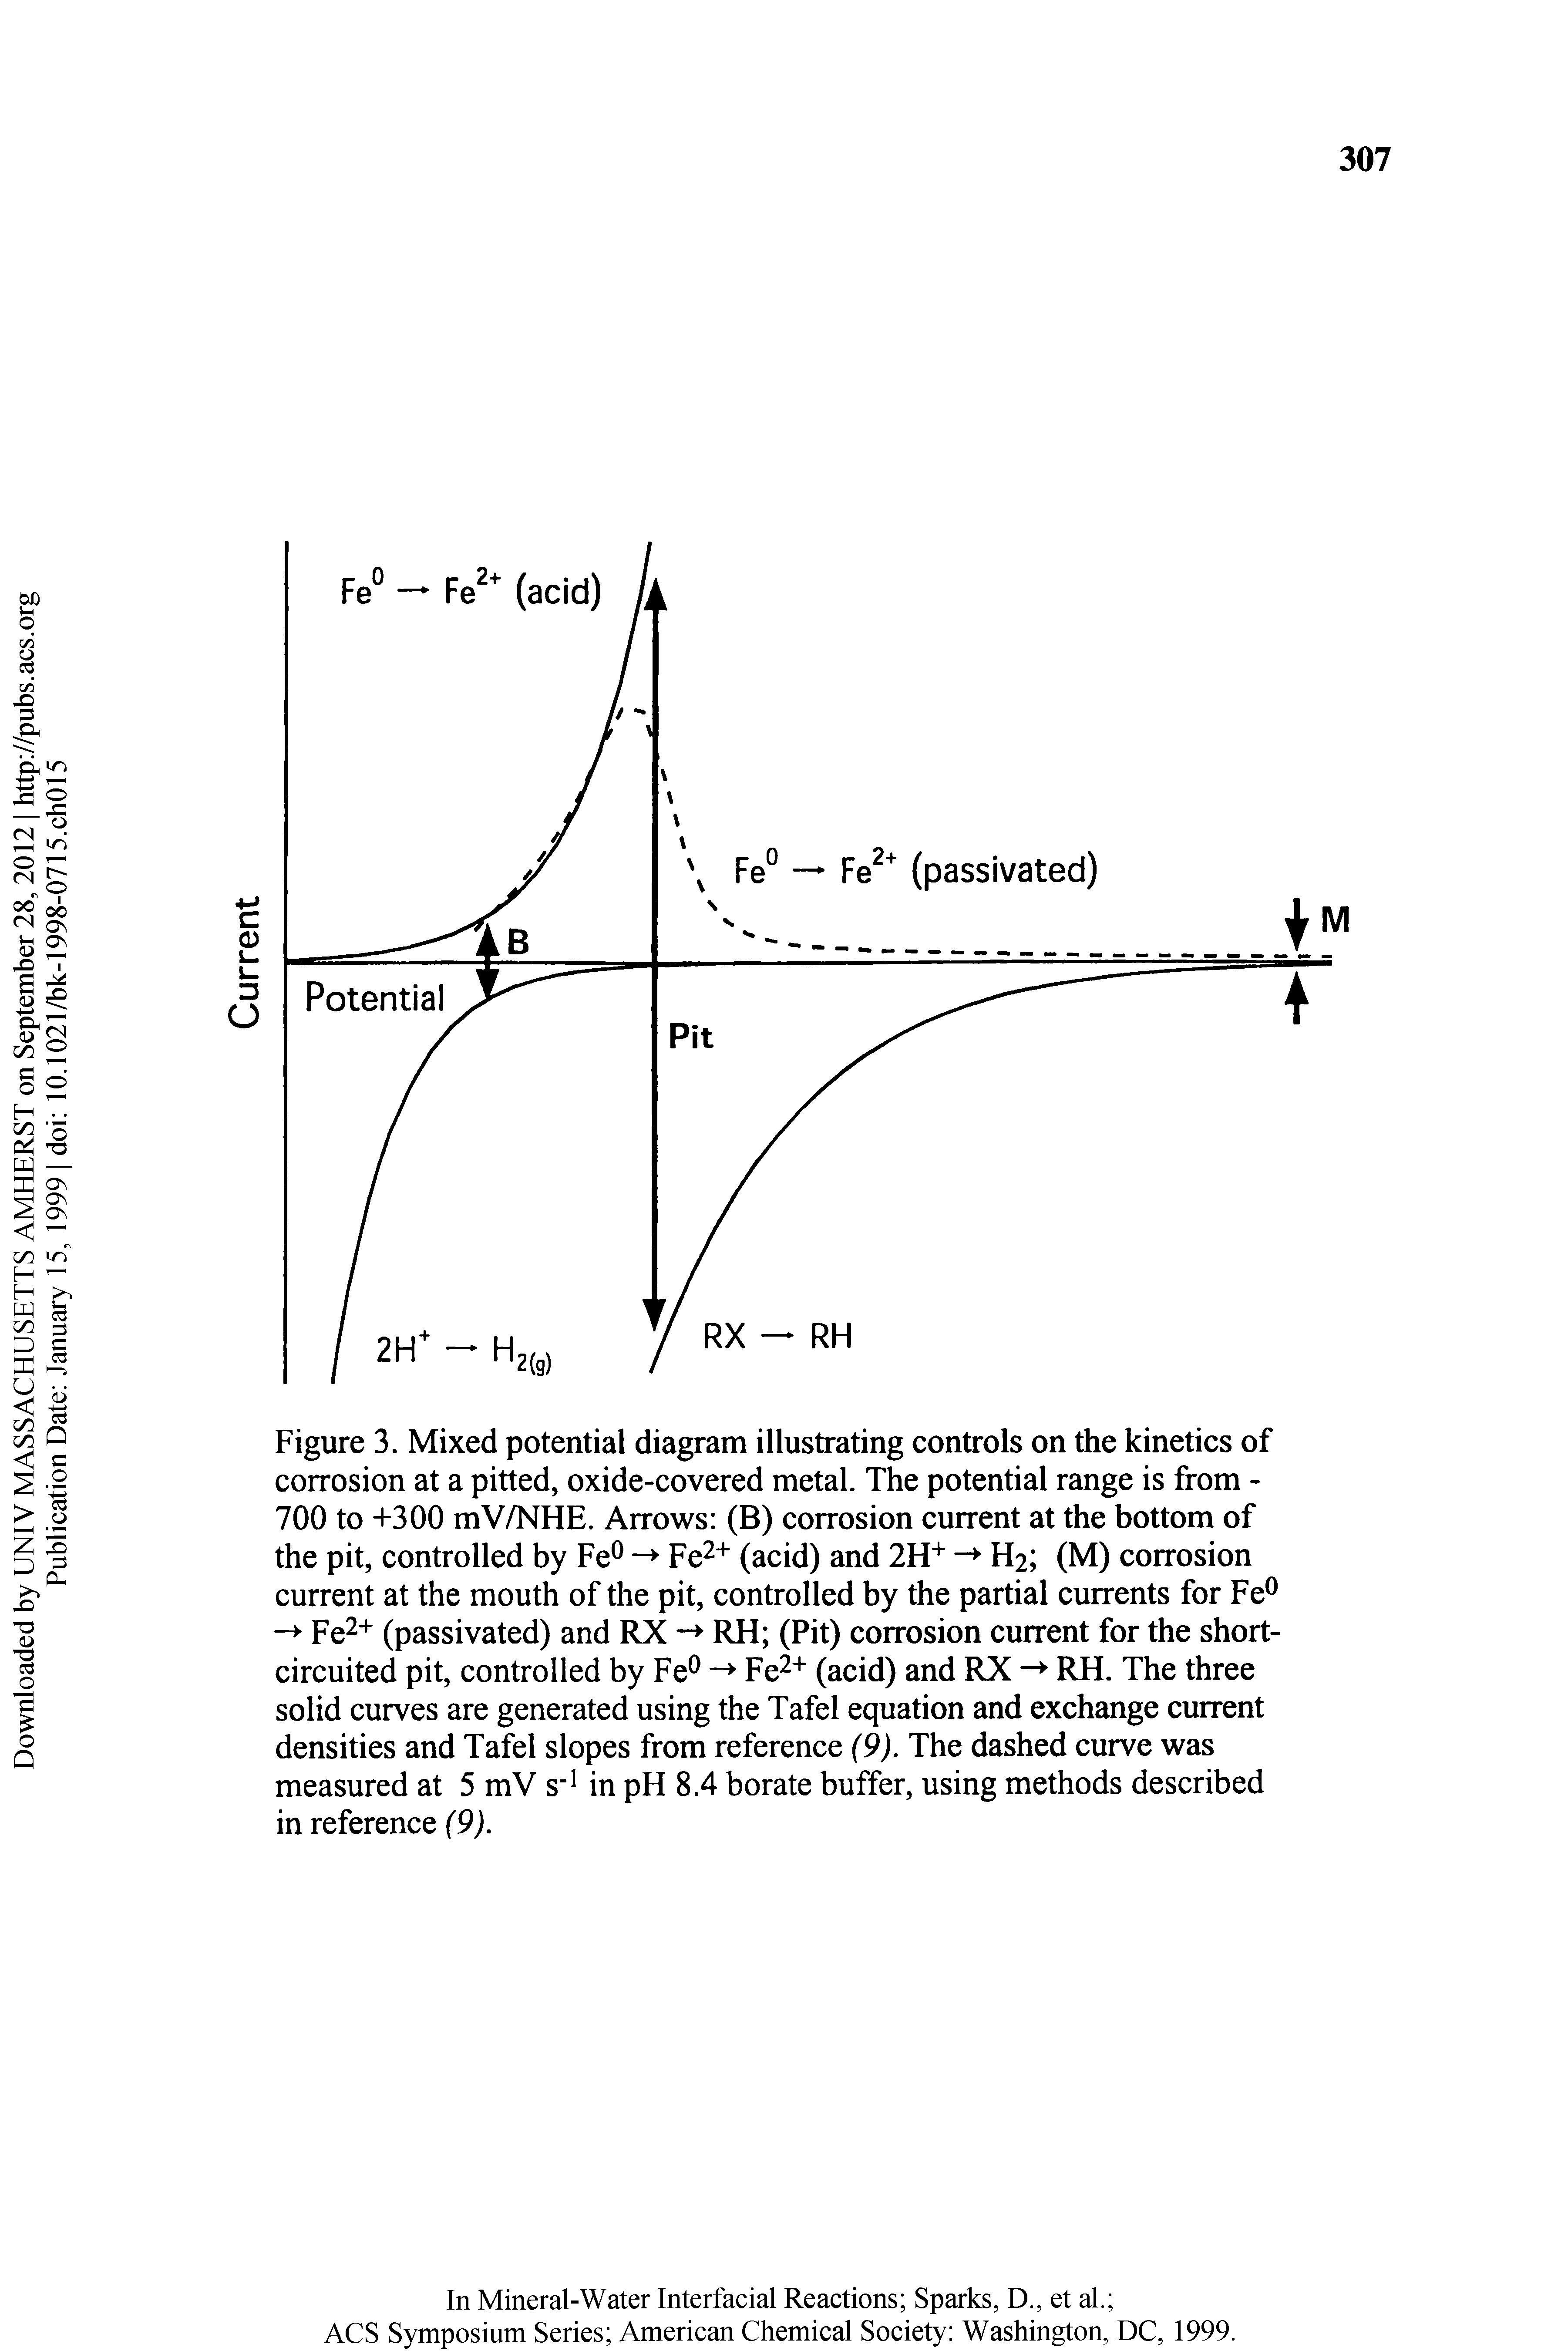 Figure 3. Mixed potential diagram illustrating controls on the kinetics of corrosion at a pitted, oxide-covered metal. The potential range is from -700 to +300 mV/NHE. Arrows (B) corrosion current at the bottom of the pit, controlled by Fe Fe + (acid) and 2H - H2 (M) corrosion current at the mouth of the pit, controlled by the partial currents for Fe -> Fe2+ (passivated) and RX RH (Pit) corrosion current for the short-circuited pit, controlled by Fe Fe + (acid) and RX - RH. The three solid curves are generated using the Tafel equation and exchange current densities and Tafel slopes from reference (9). The dashed curve was measured at 5 mV s in pH 8.4 borate buffer, using methods described in reference (9).